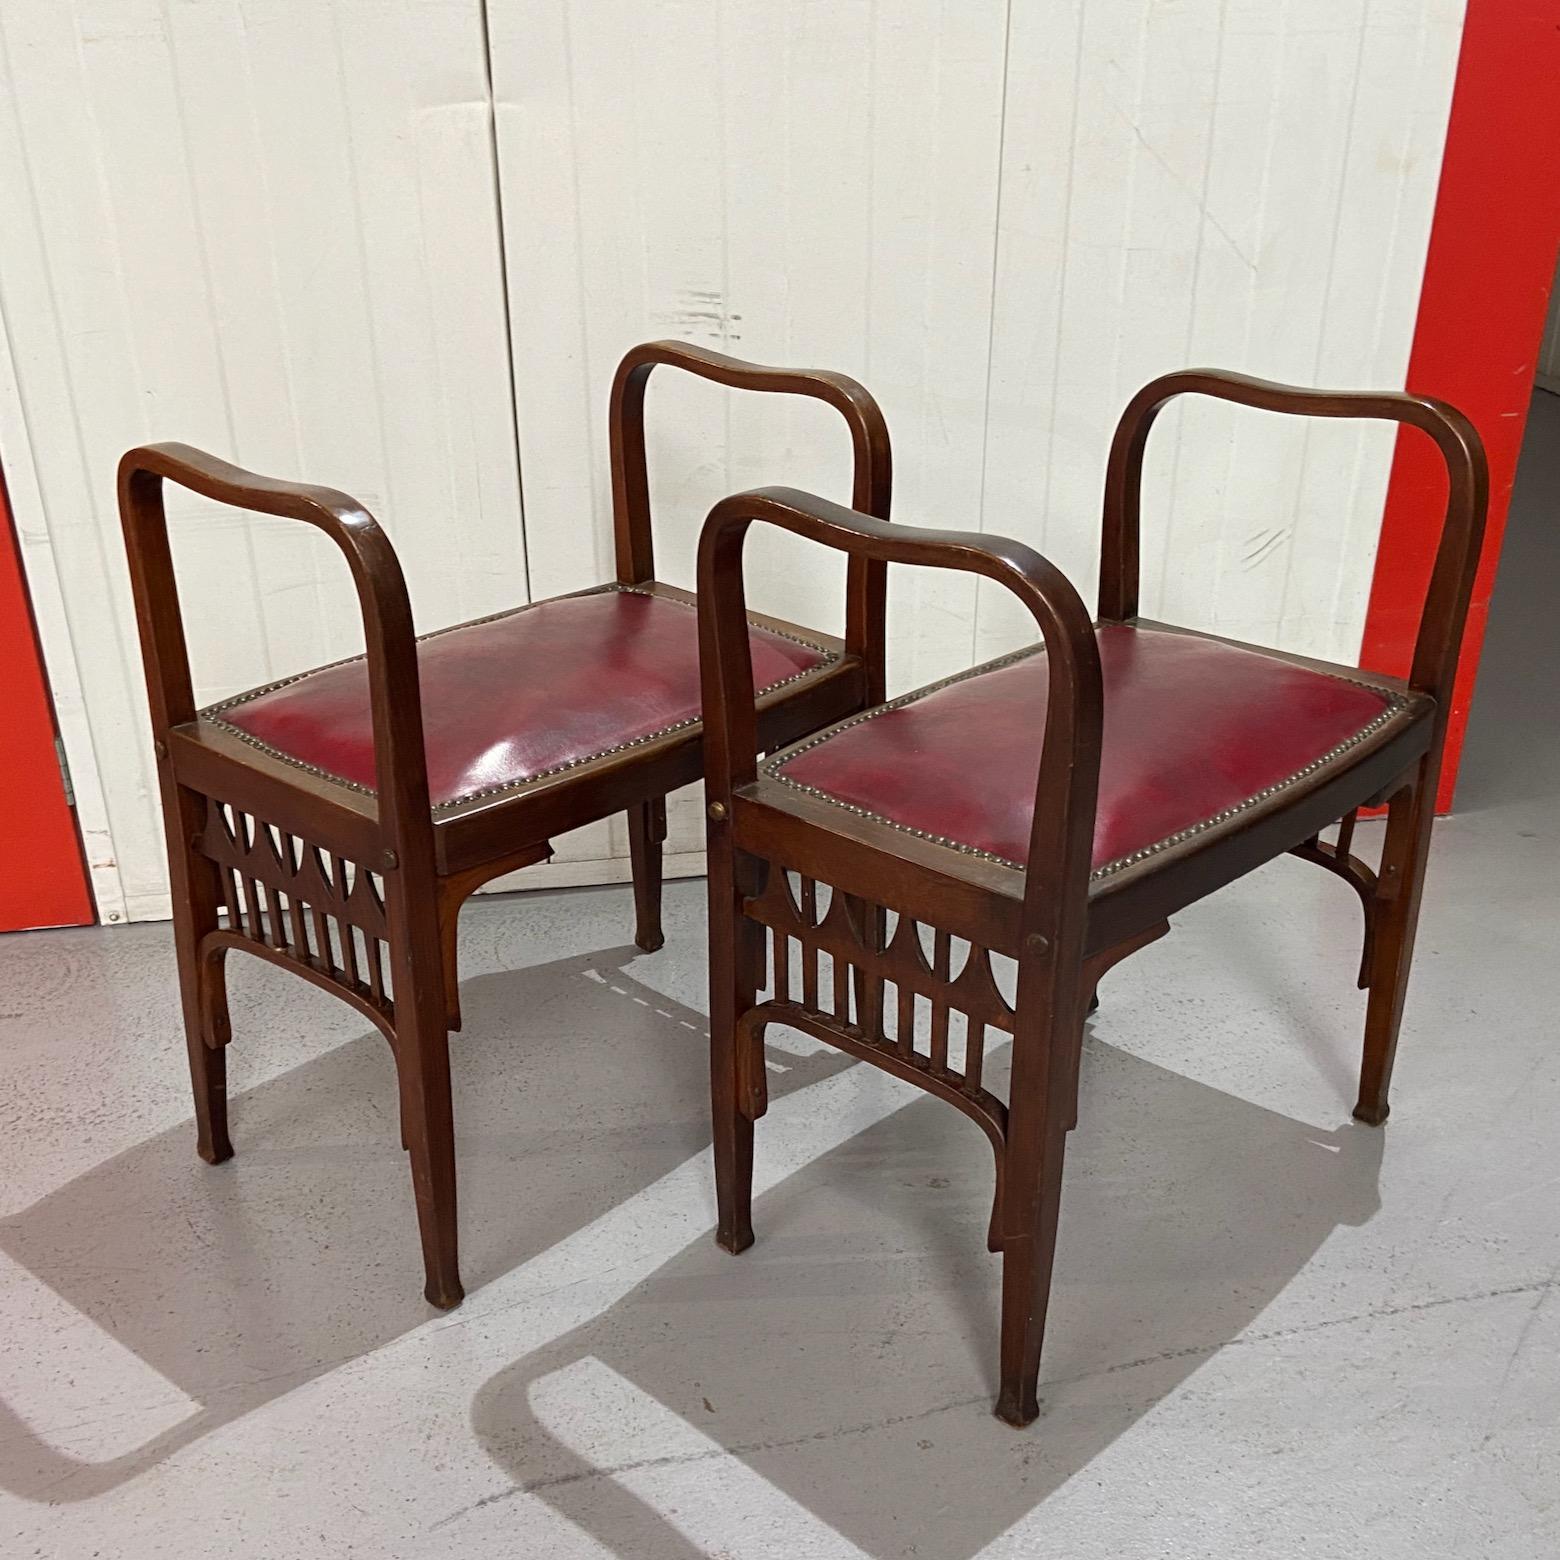 Vienna Secession Pair of Austrian Secessionist Bentwood Stools, Benches or Causeuses, early 20thC For Sale